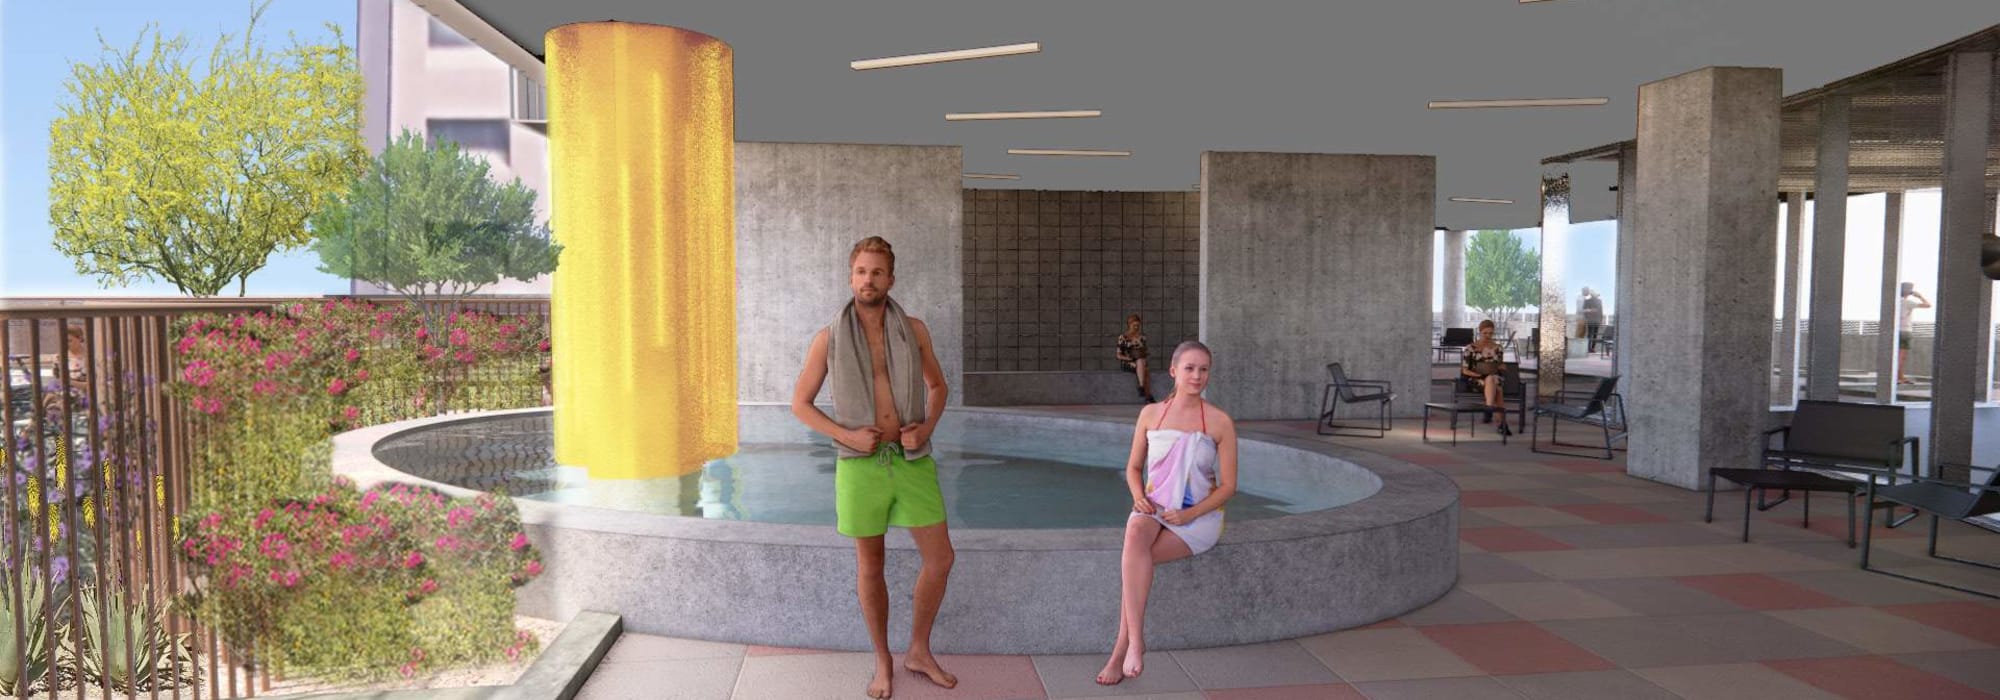 Render of our spa at PALMtower in Phoenix, Arizona